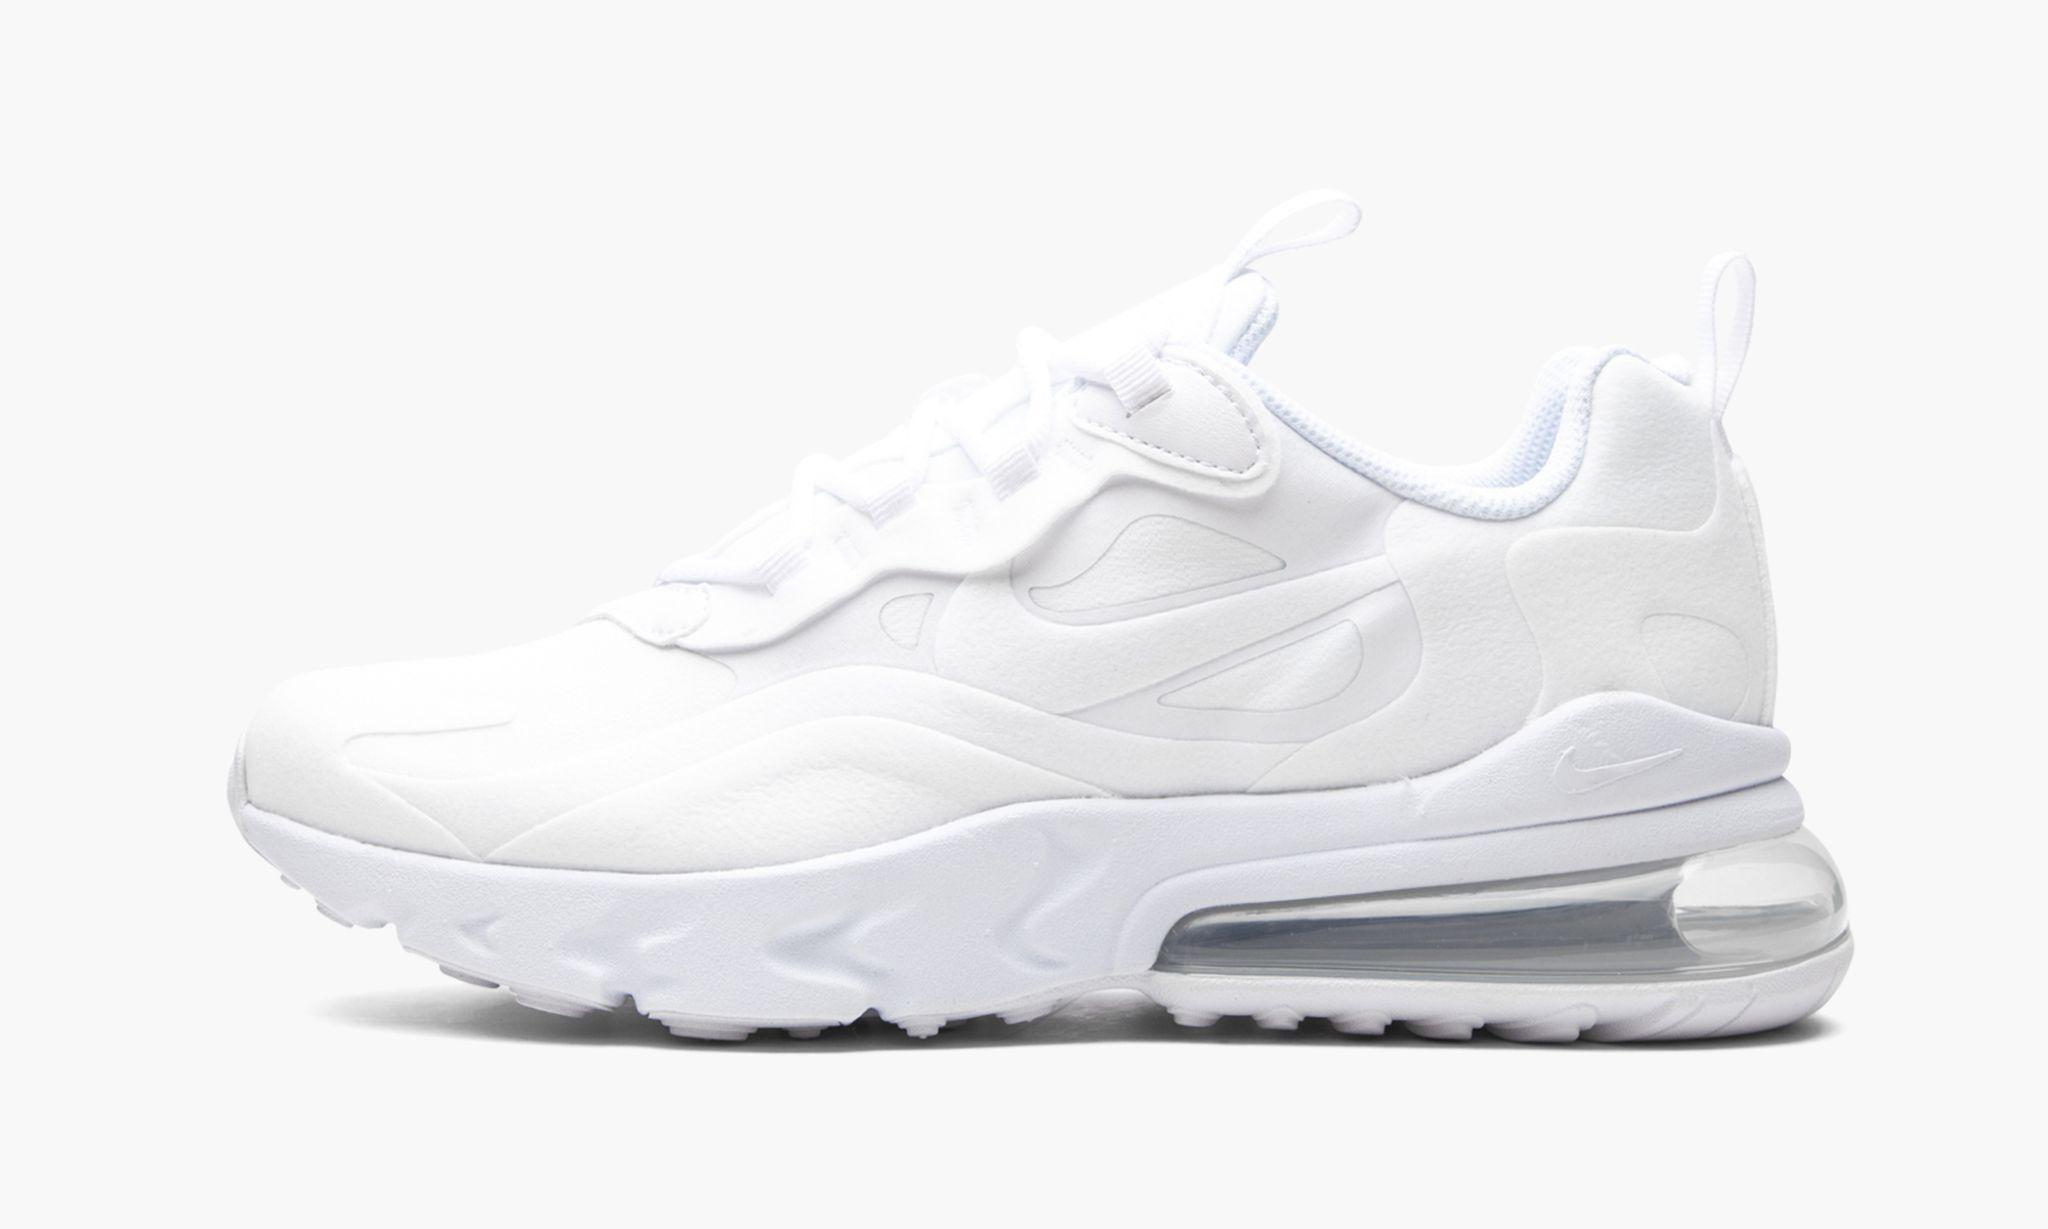 Nike Air Max 270 React "triple White" Shoes for Men | Lyst